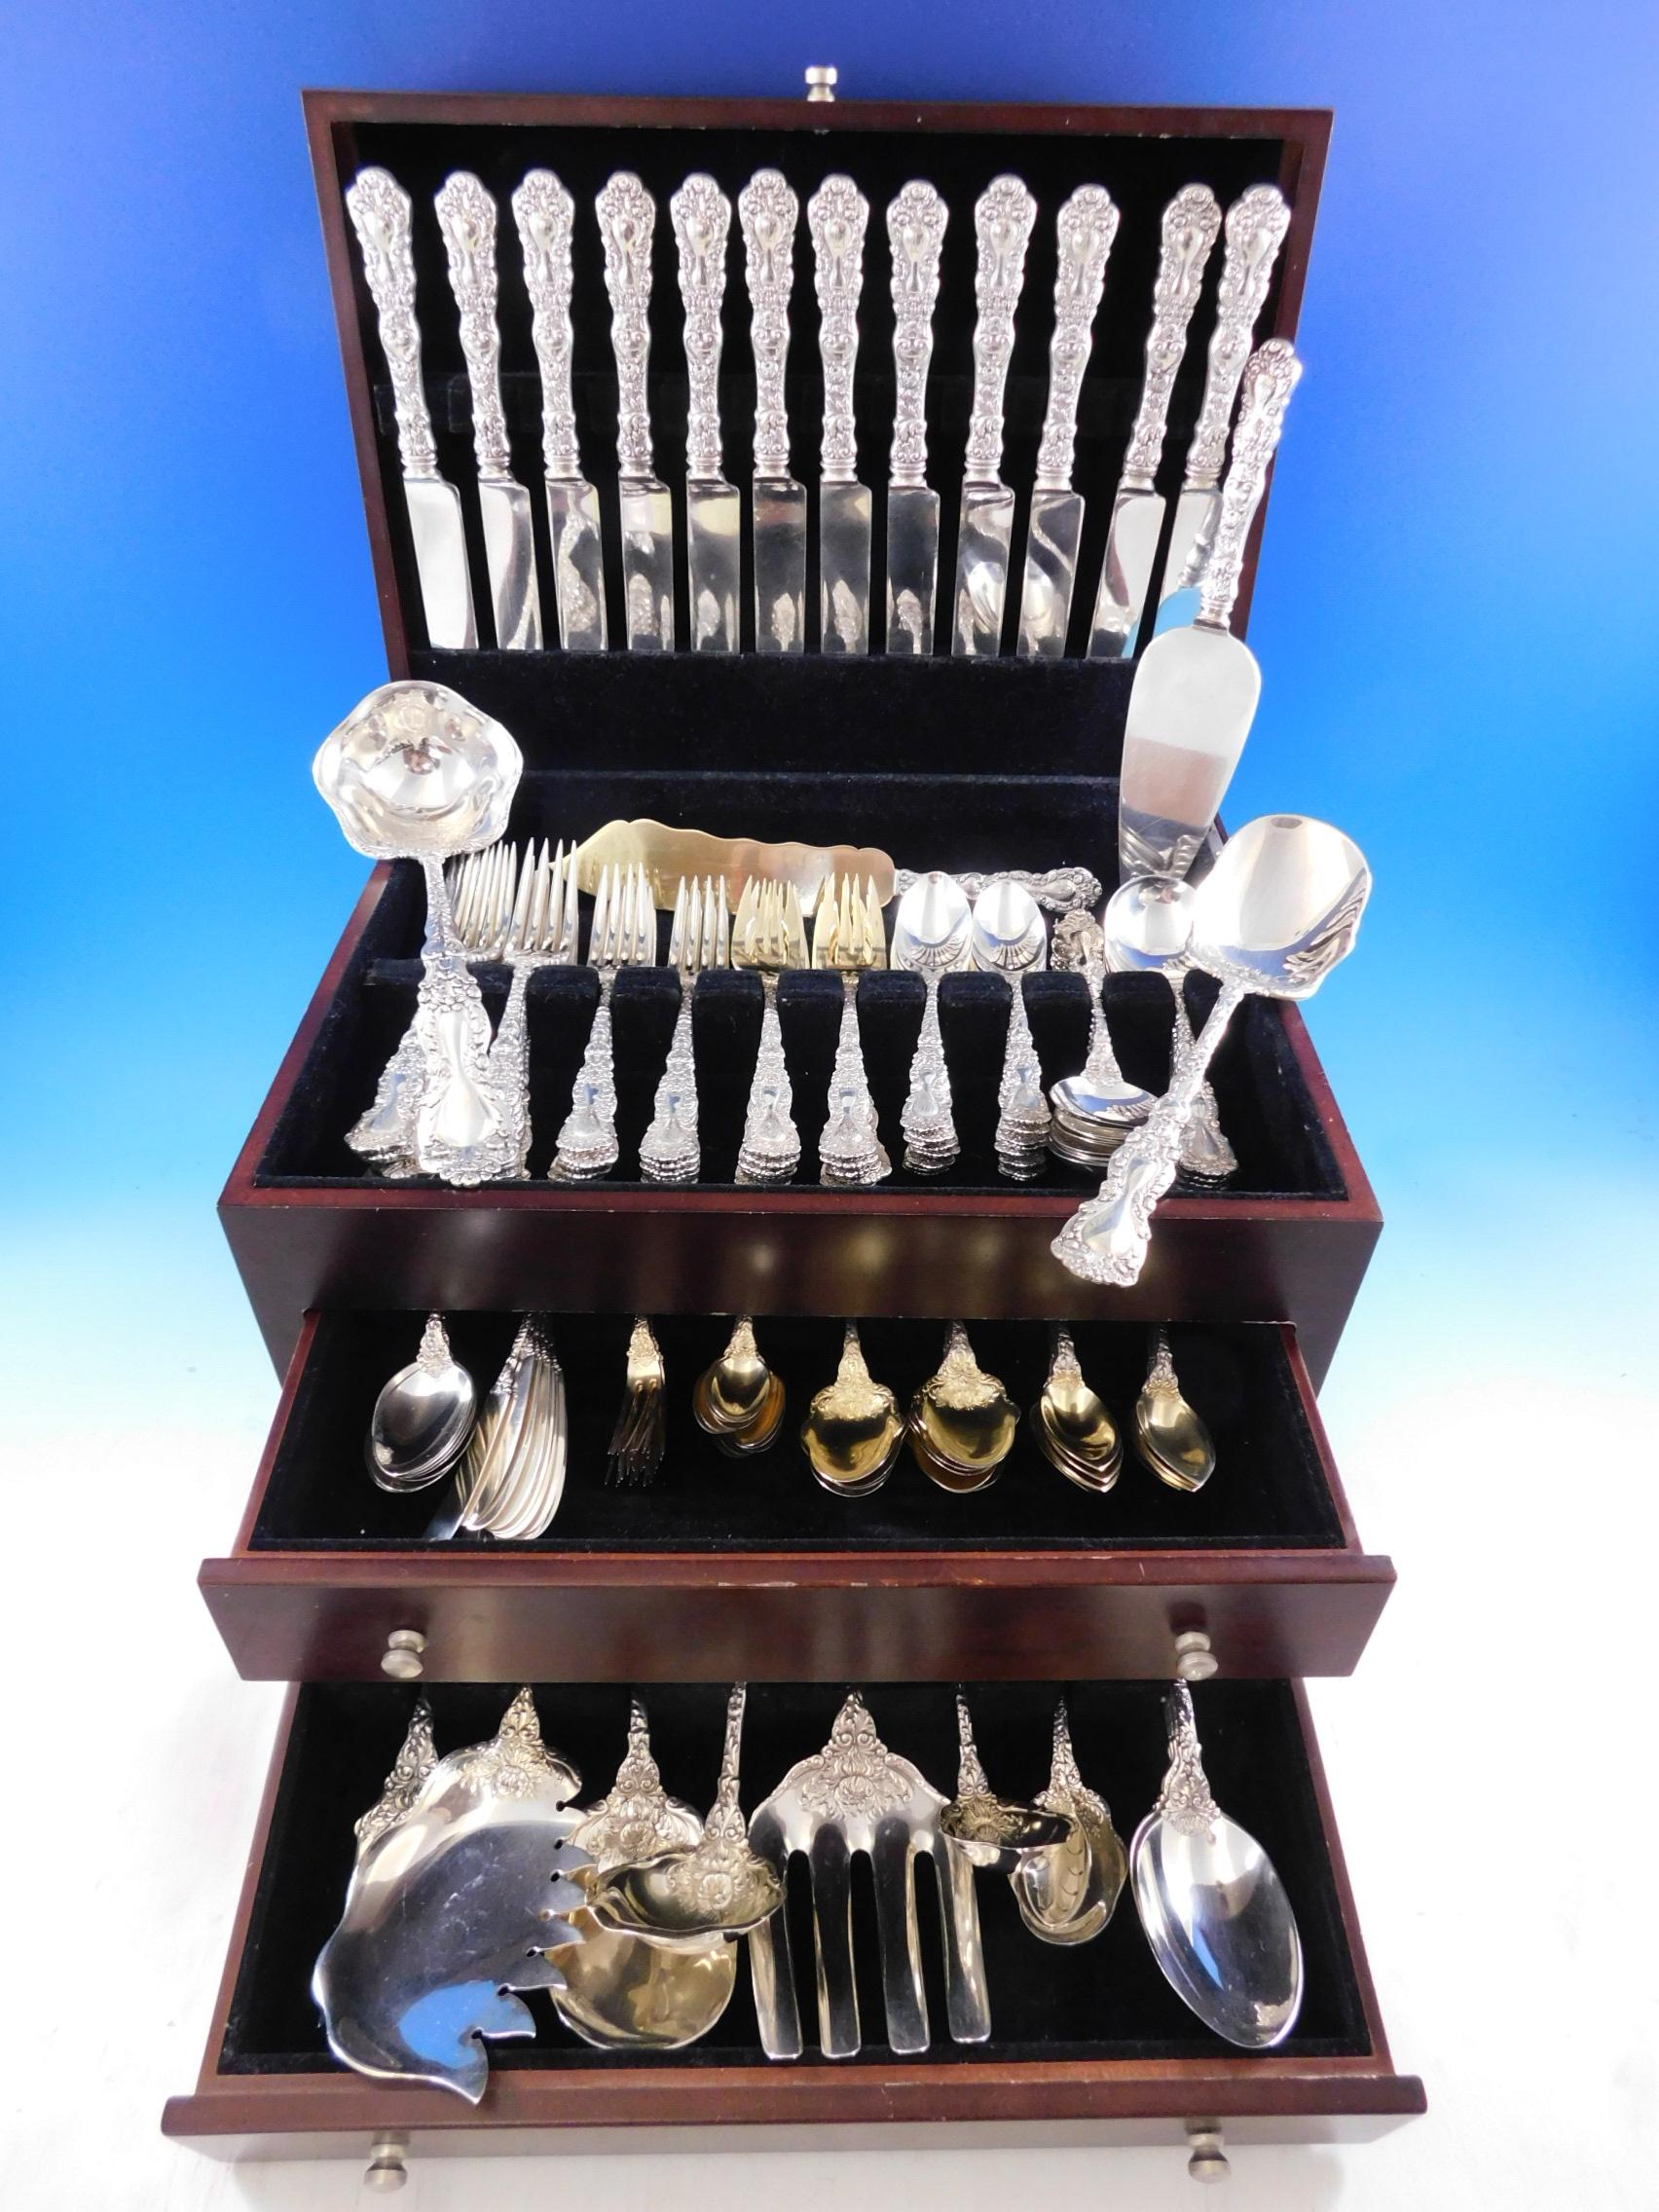 Monumental Imperial Chrysanthemum by Gorham sterling silver Flatware set, 162 pieces. Chrysanthemum flowers run down both the back and front side of the handle with chrysanthemum blooms spilling down onto the reverse. This glorious pattern was